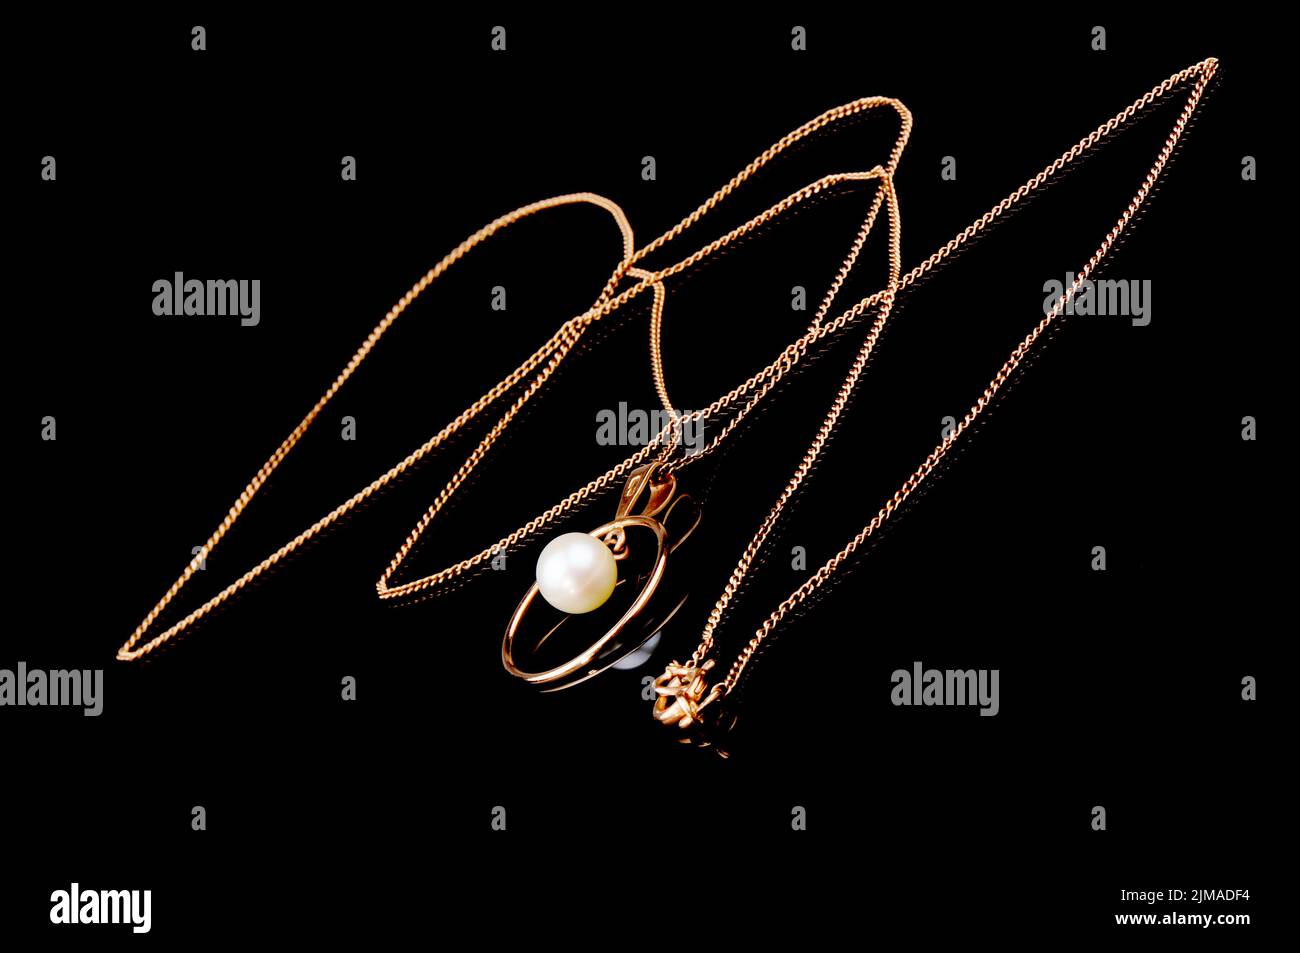 Golden chain with pendant on black mirrored surface Stock Photo